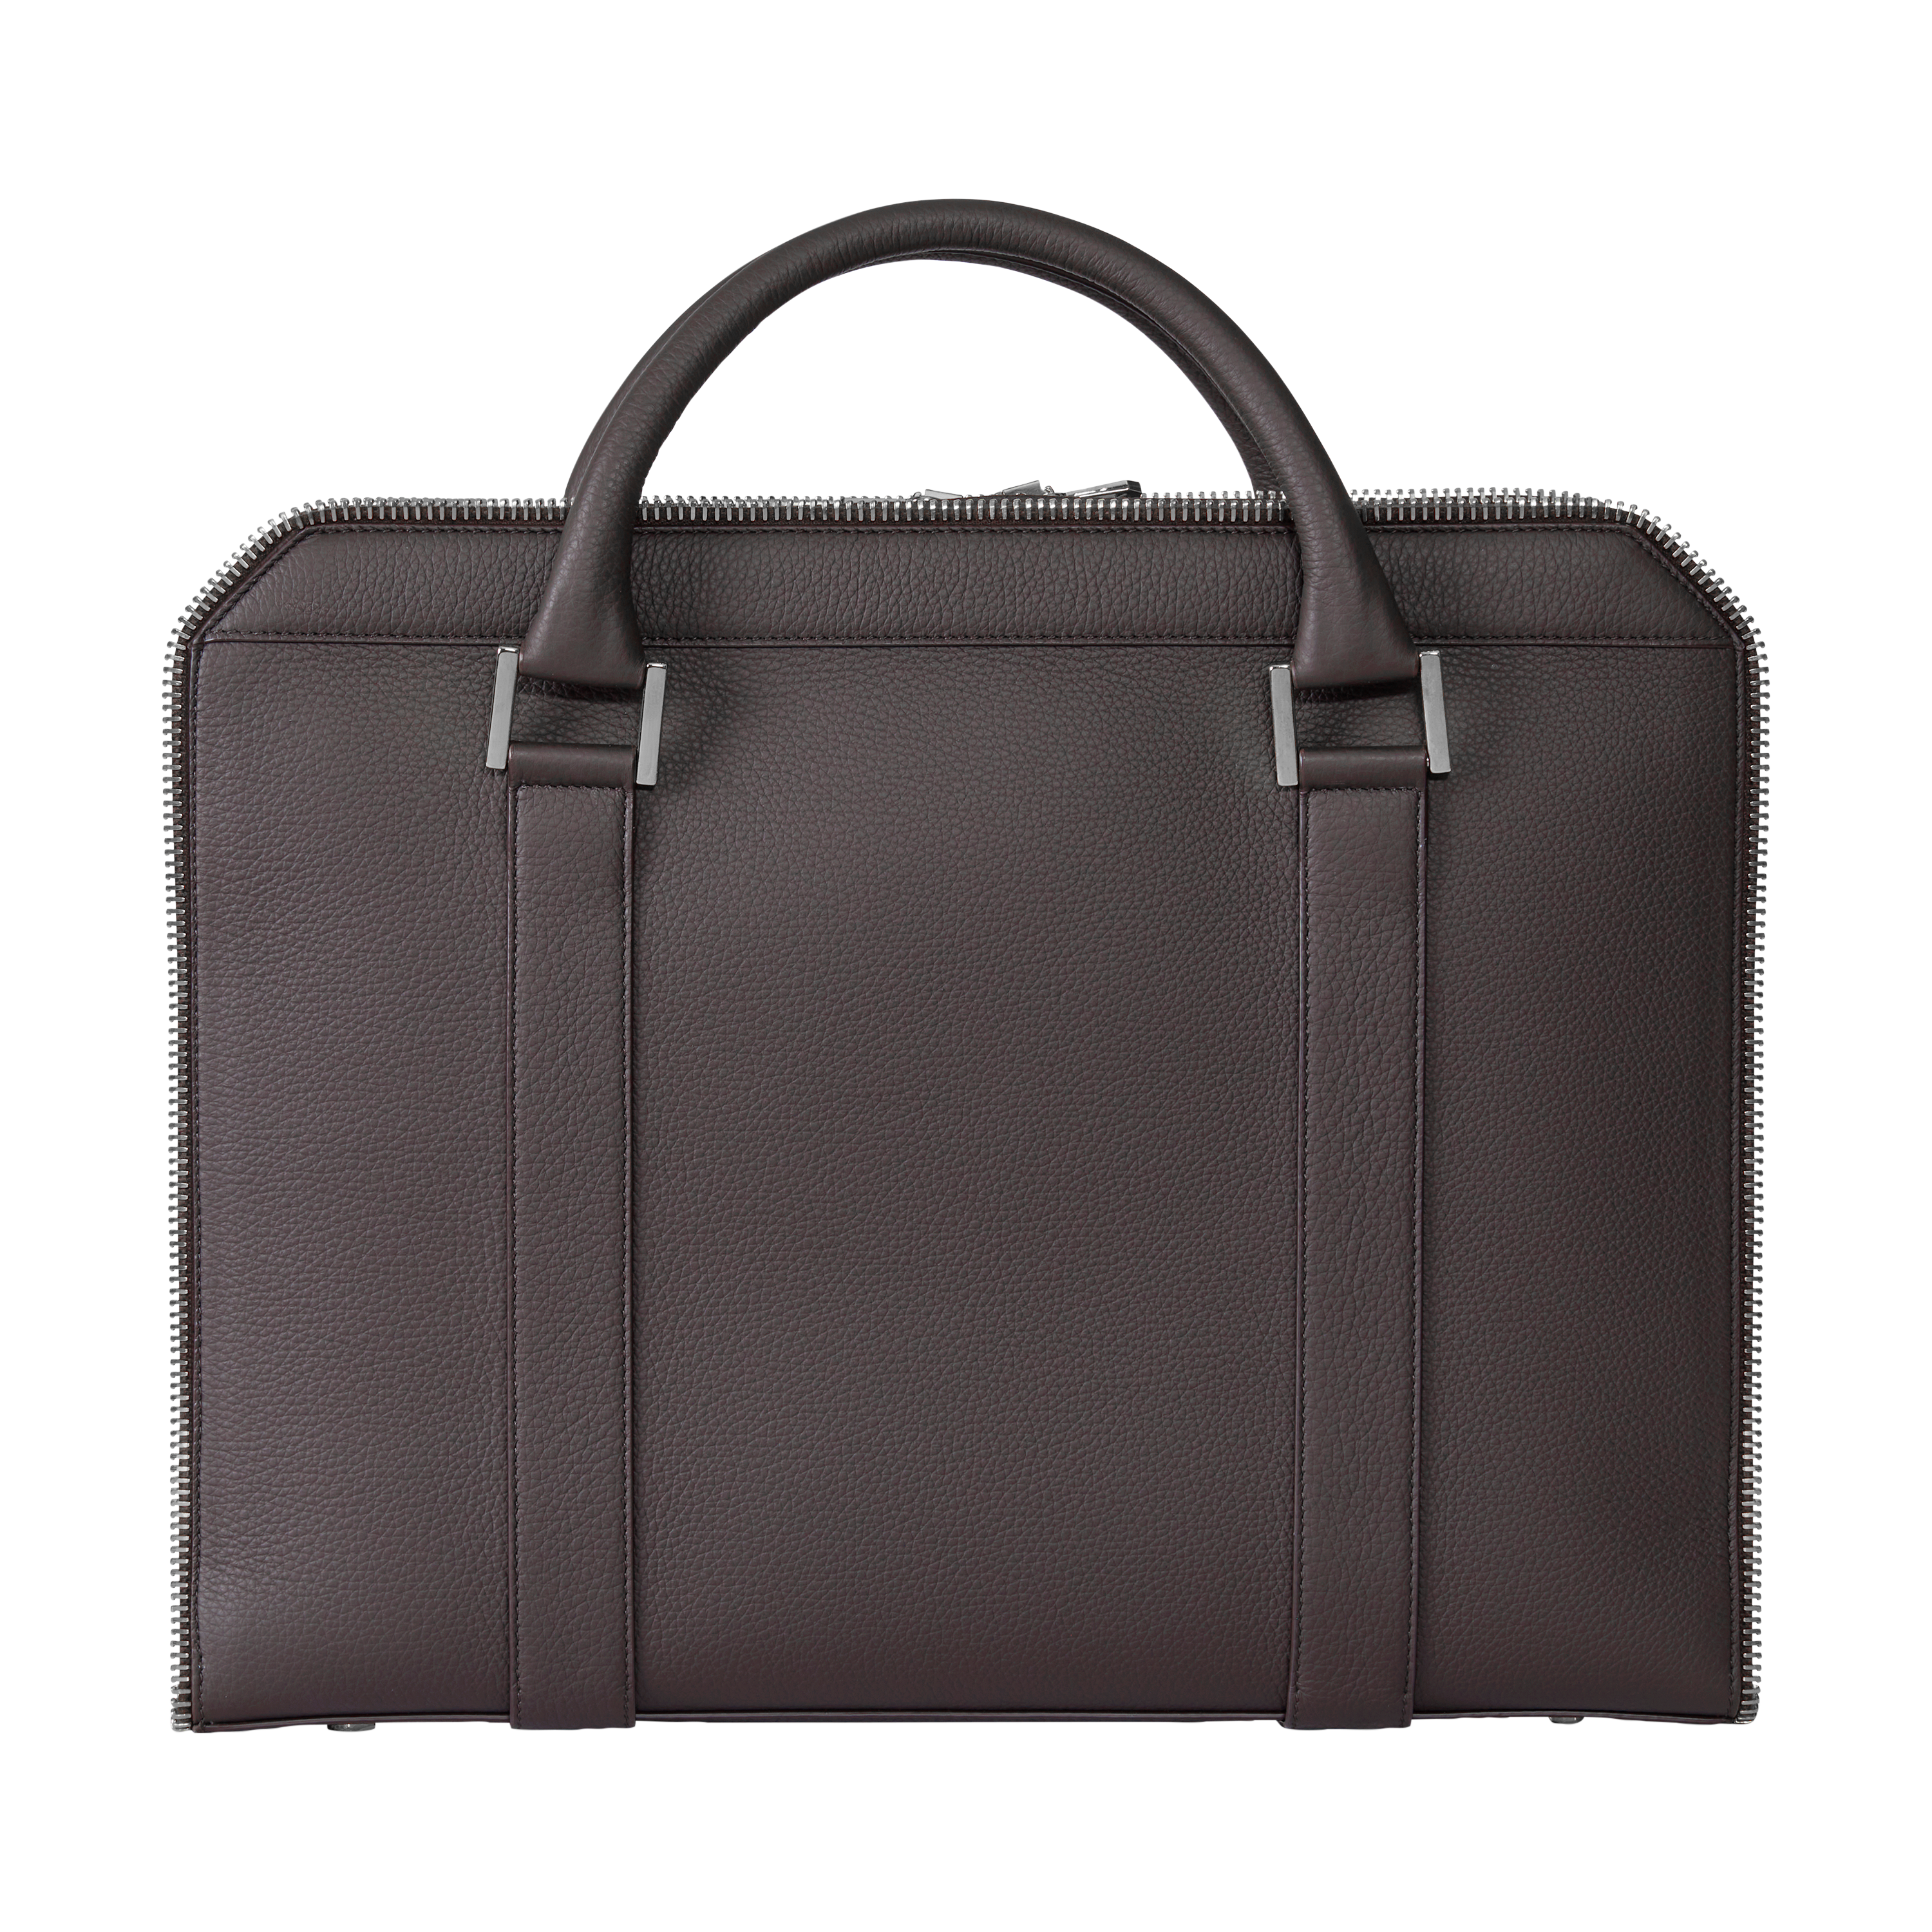 Leather briefcase in brown with zippers